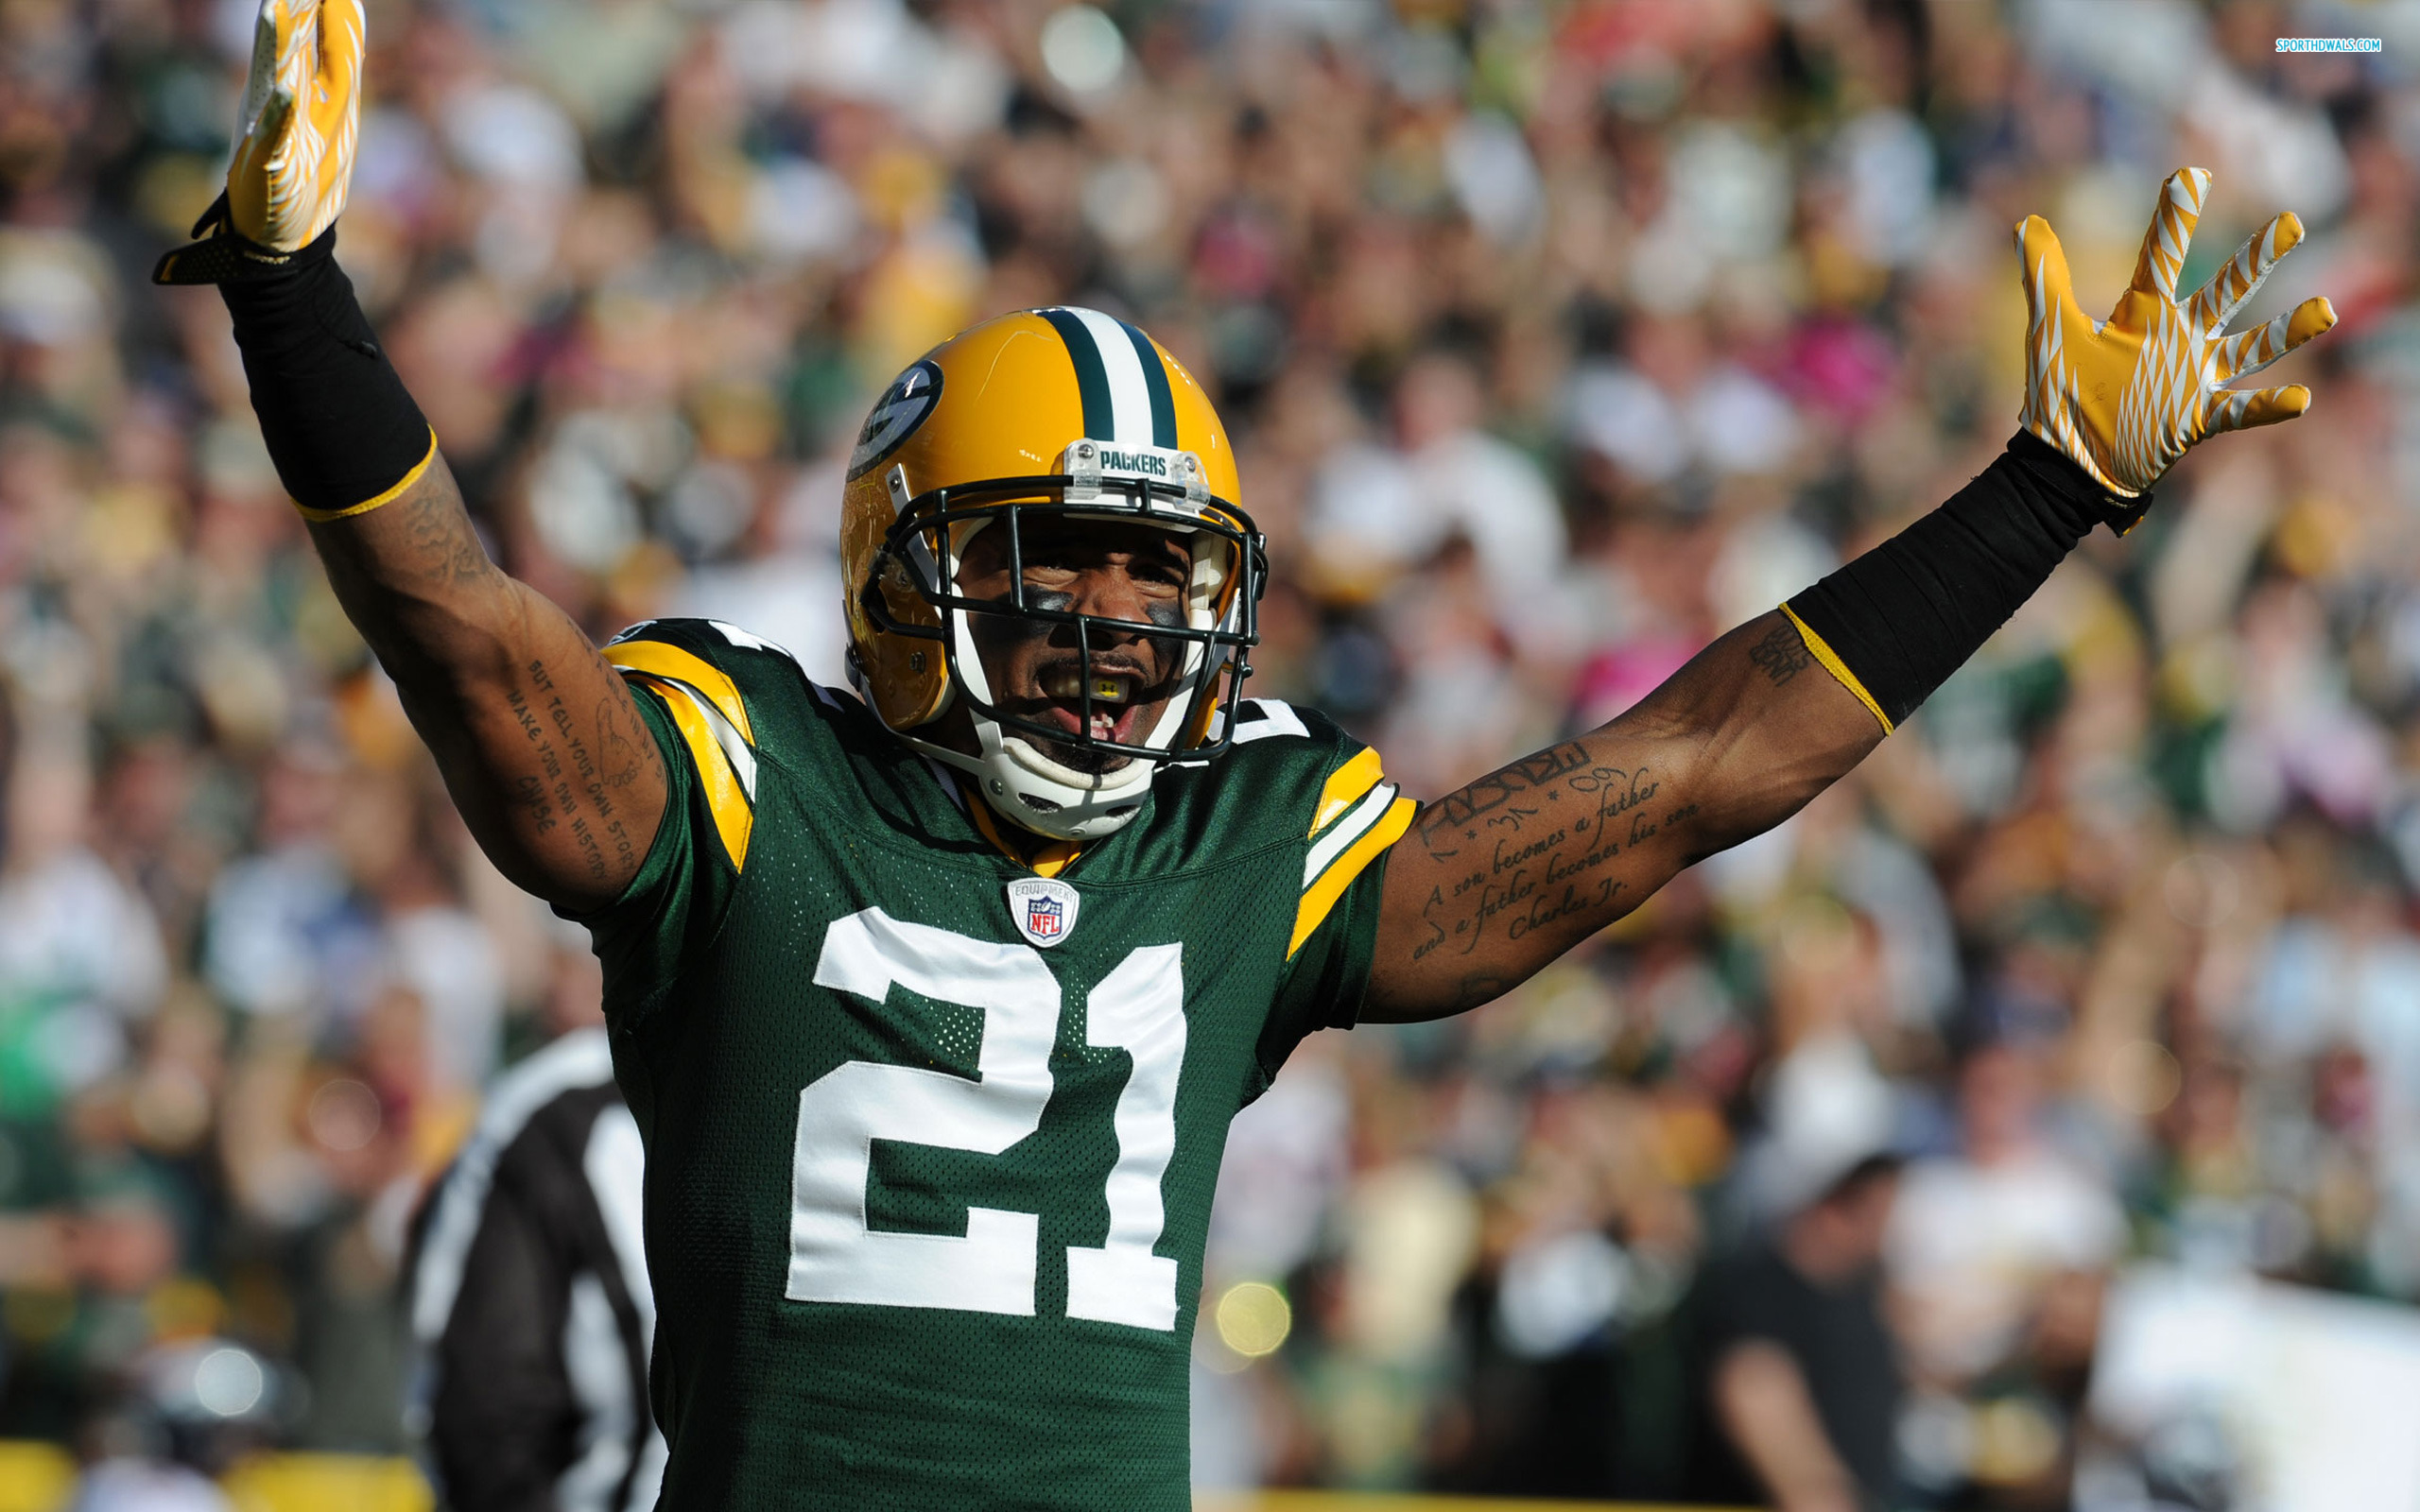 5. Charles Woodson RealClearSports